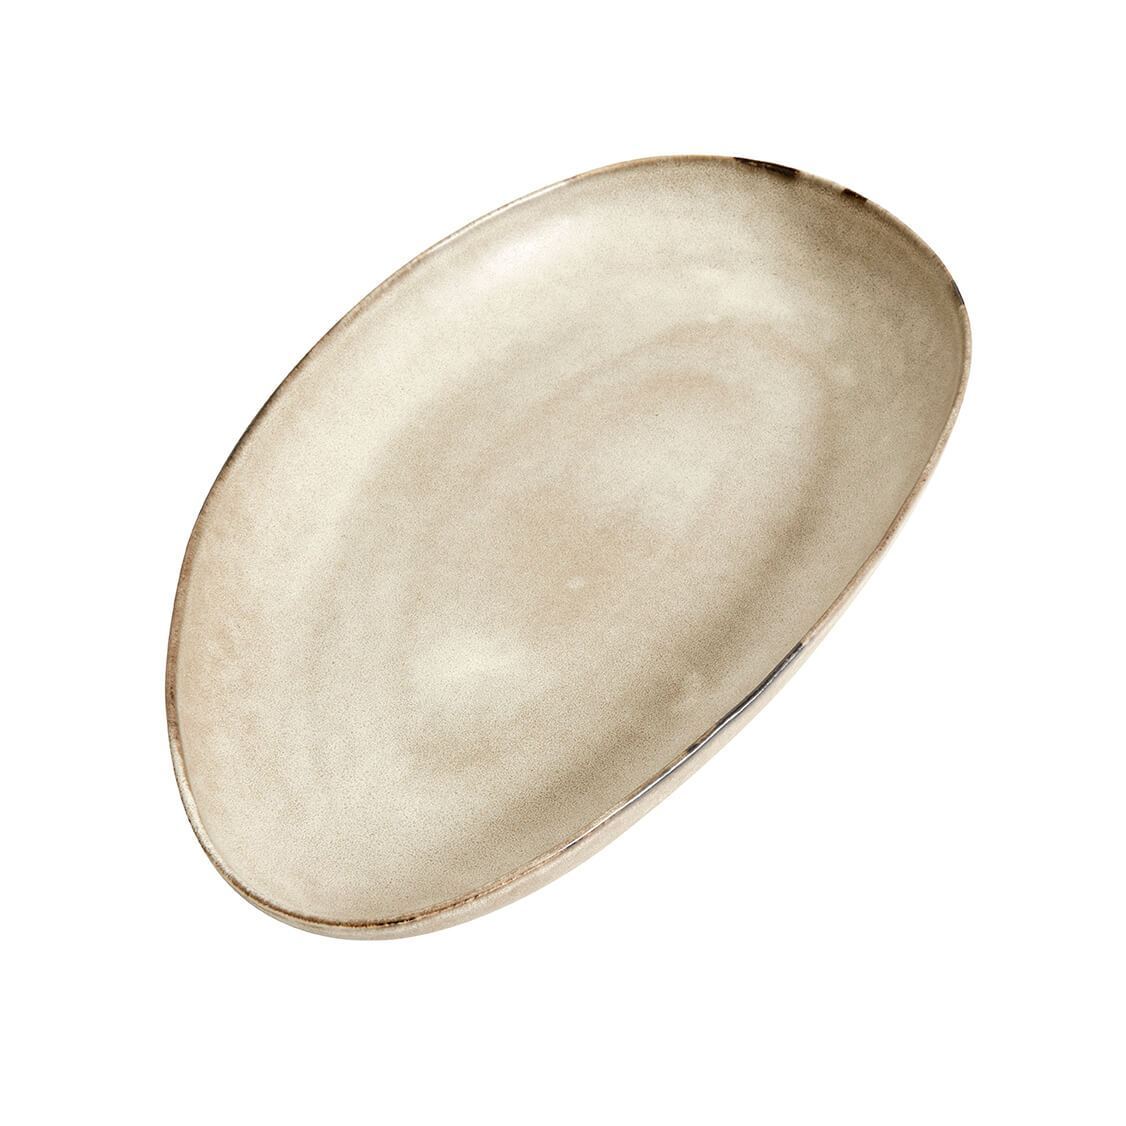 Muubs MAME SERVING PLATE Oval Oyster, 43 cm